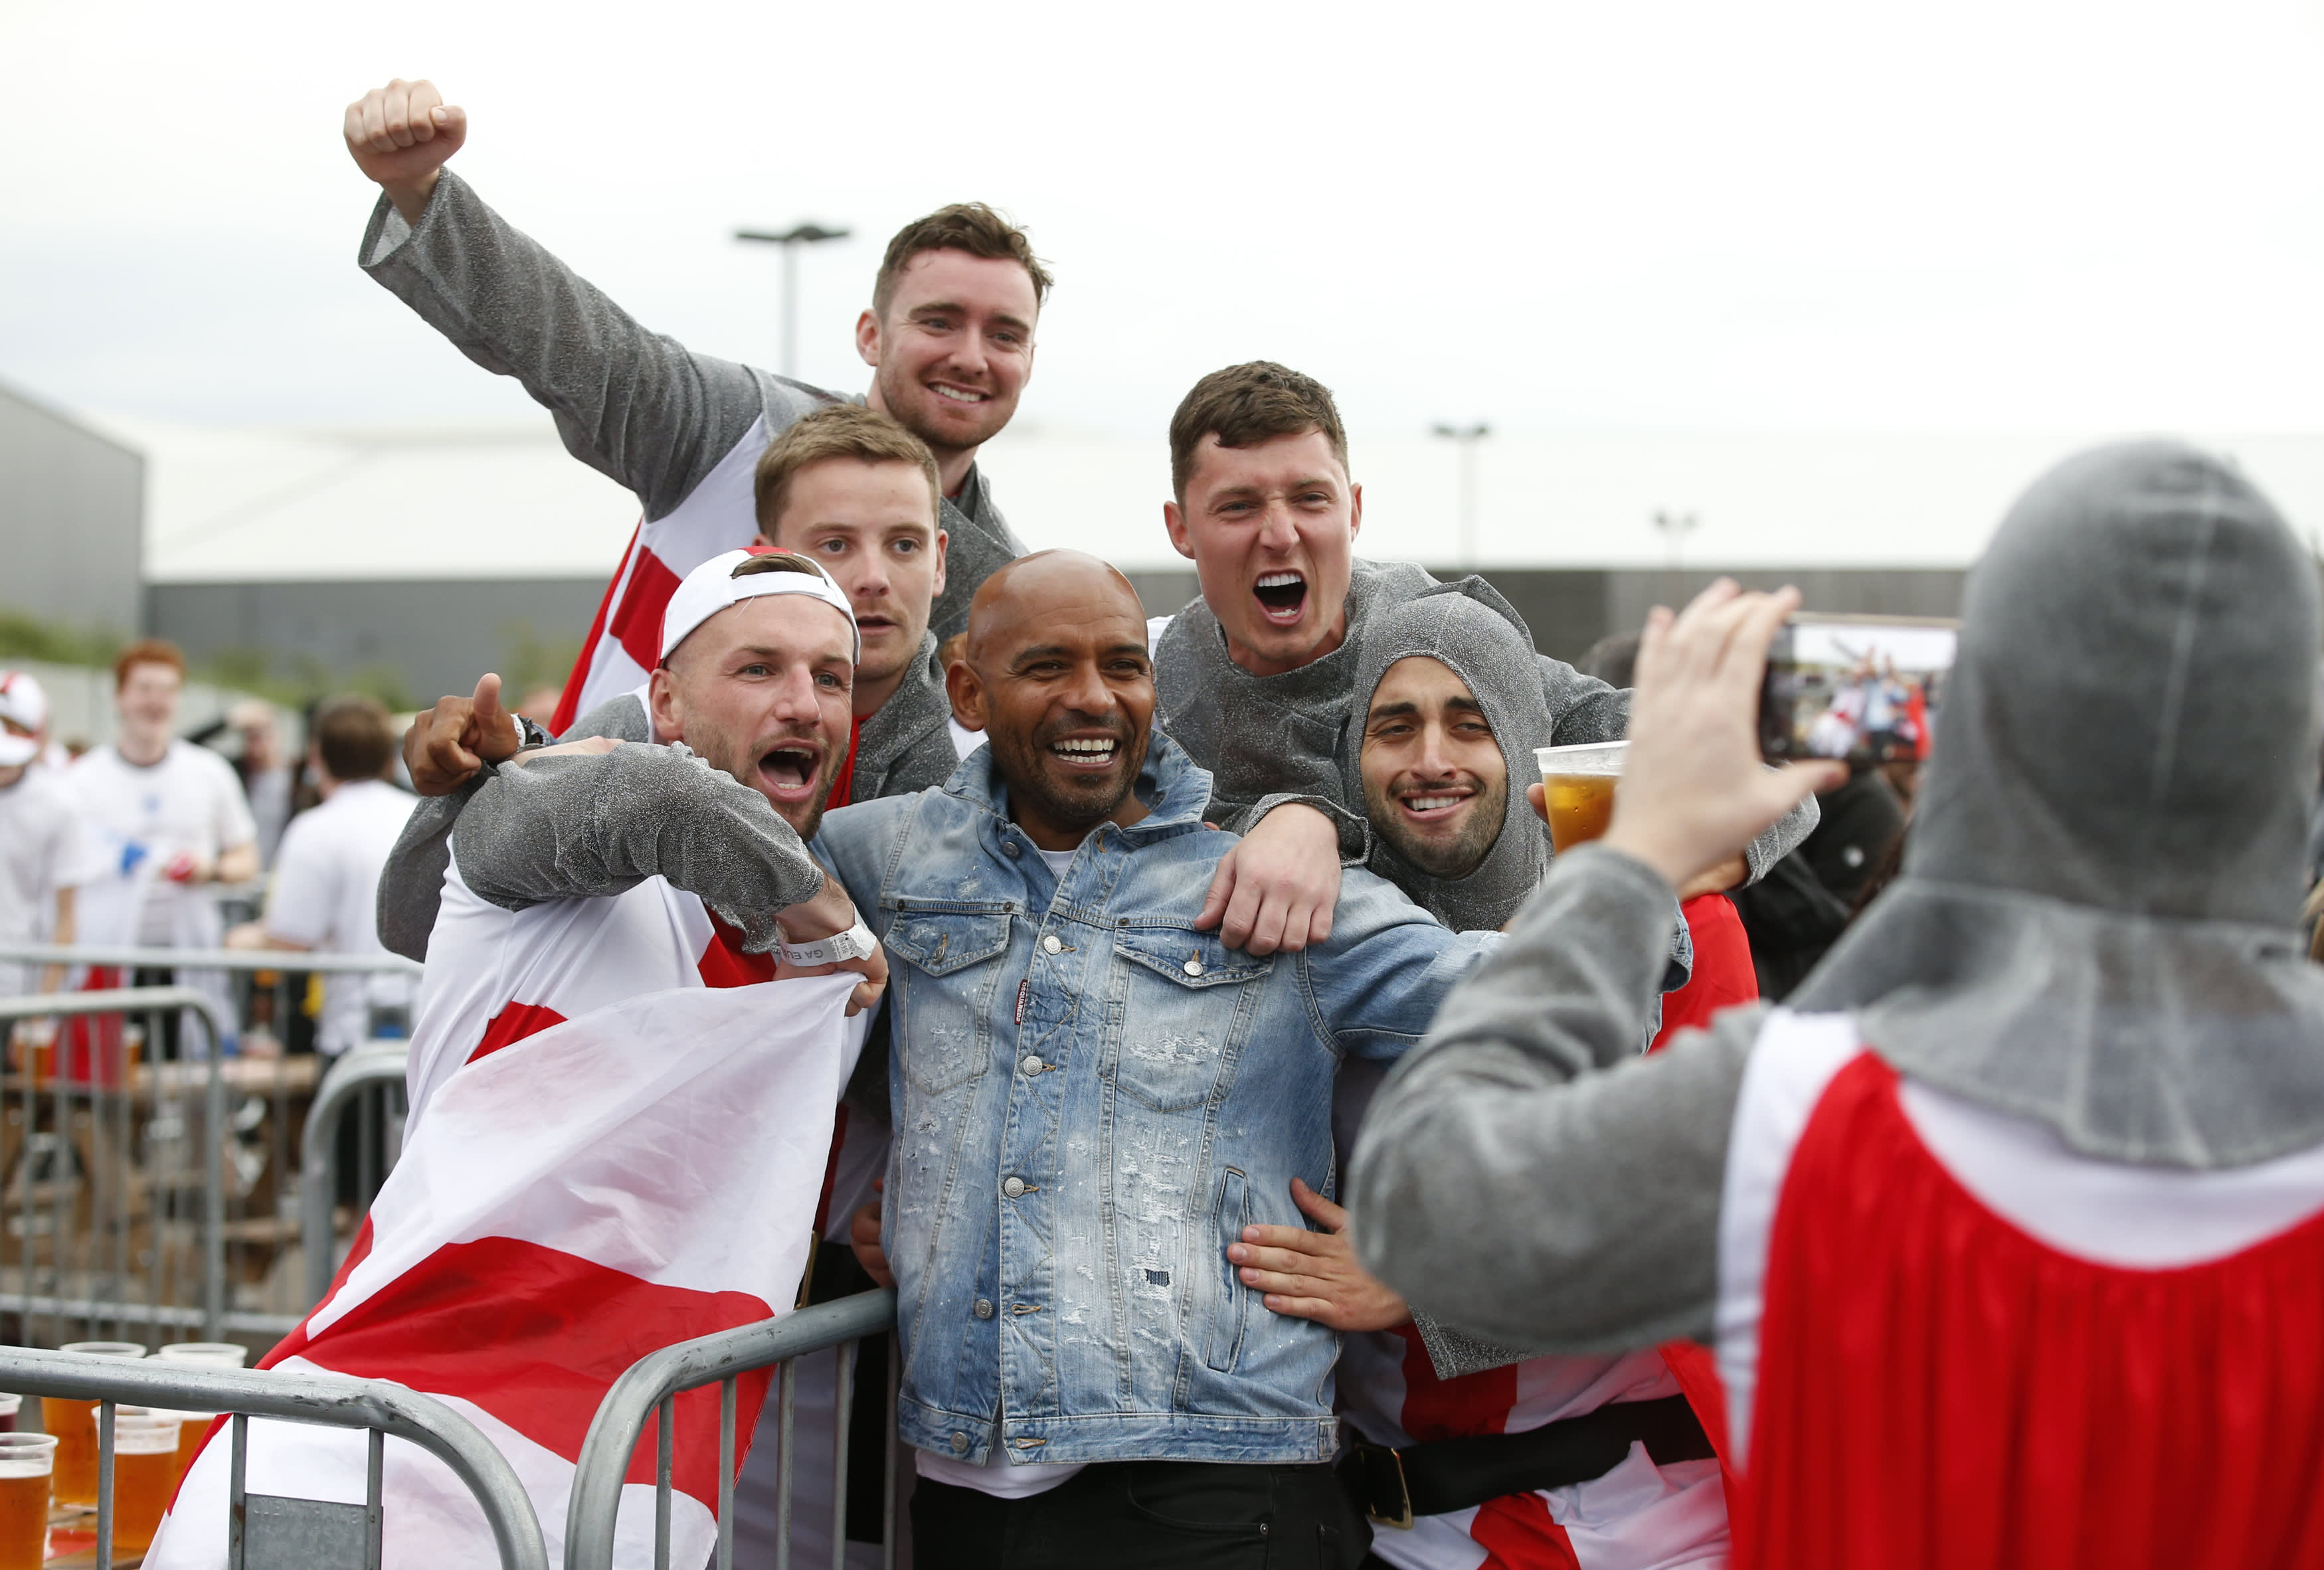 Qatar World Cup bans English soccer fans from dressing as medieval Crusaders